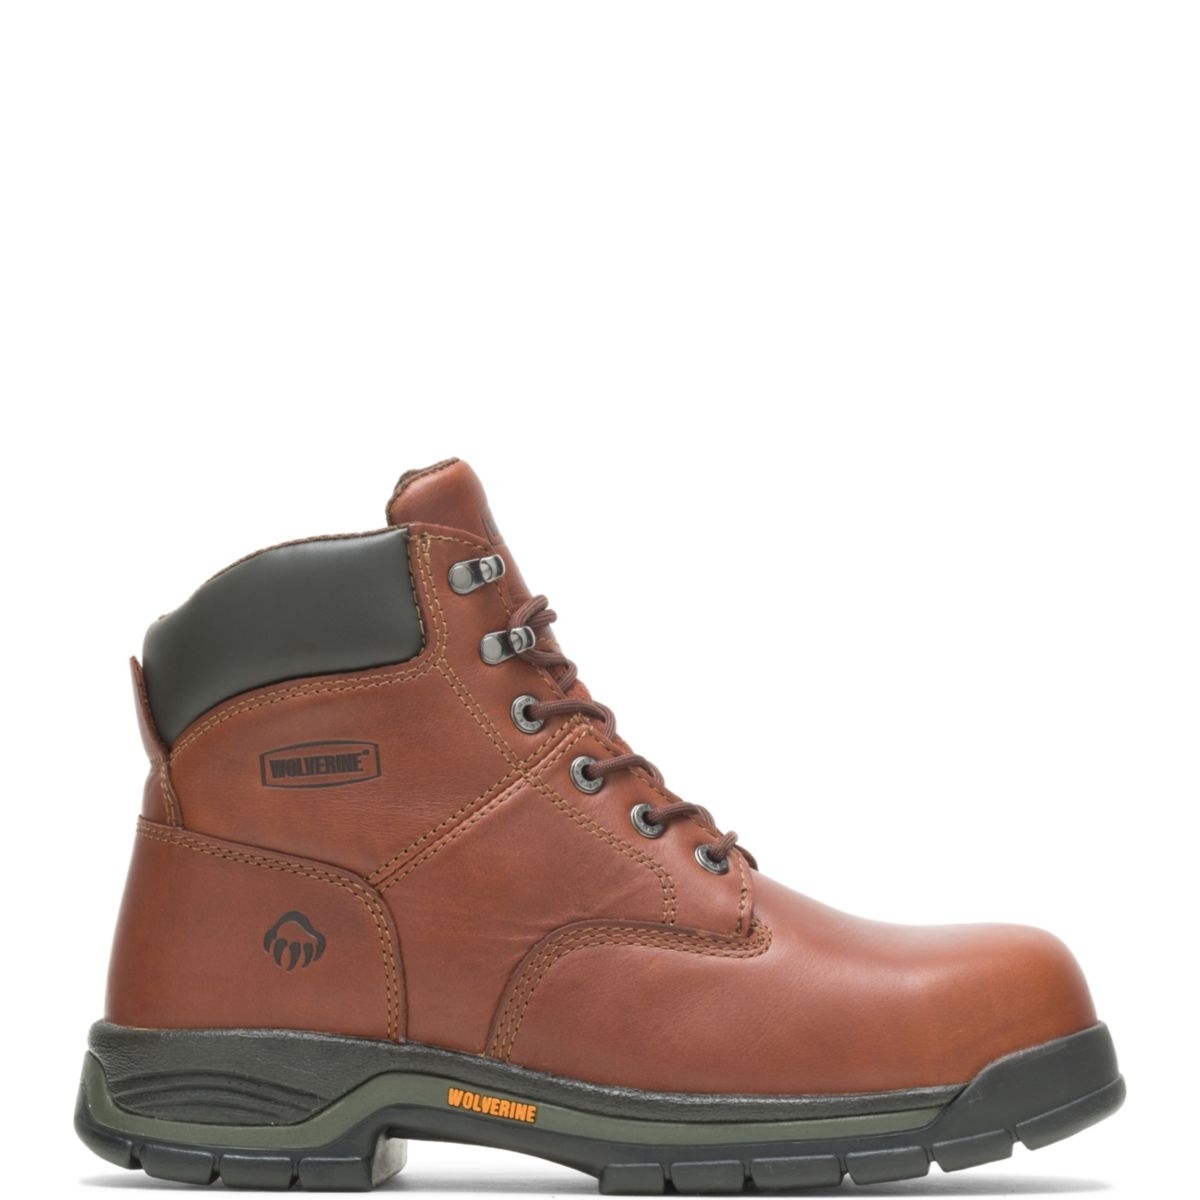 WOLVERINE Men's Harrison 6 Lace-Up SoftToe Work Boot Brown - W04906 Varies BROWN - BROWN, 10